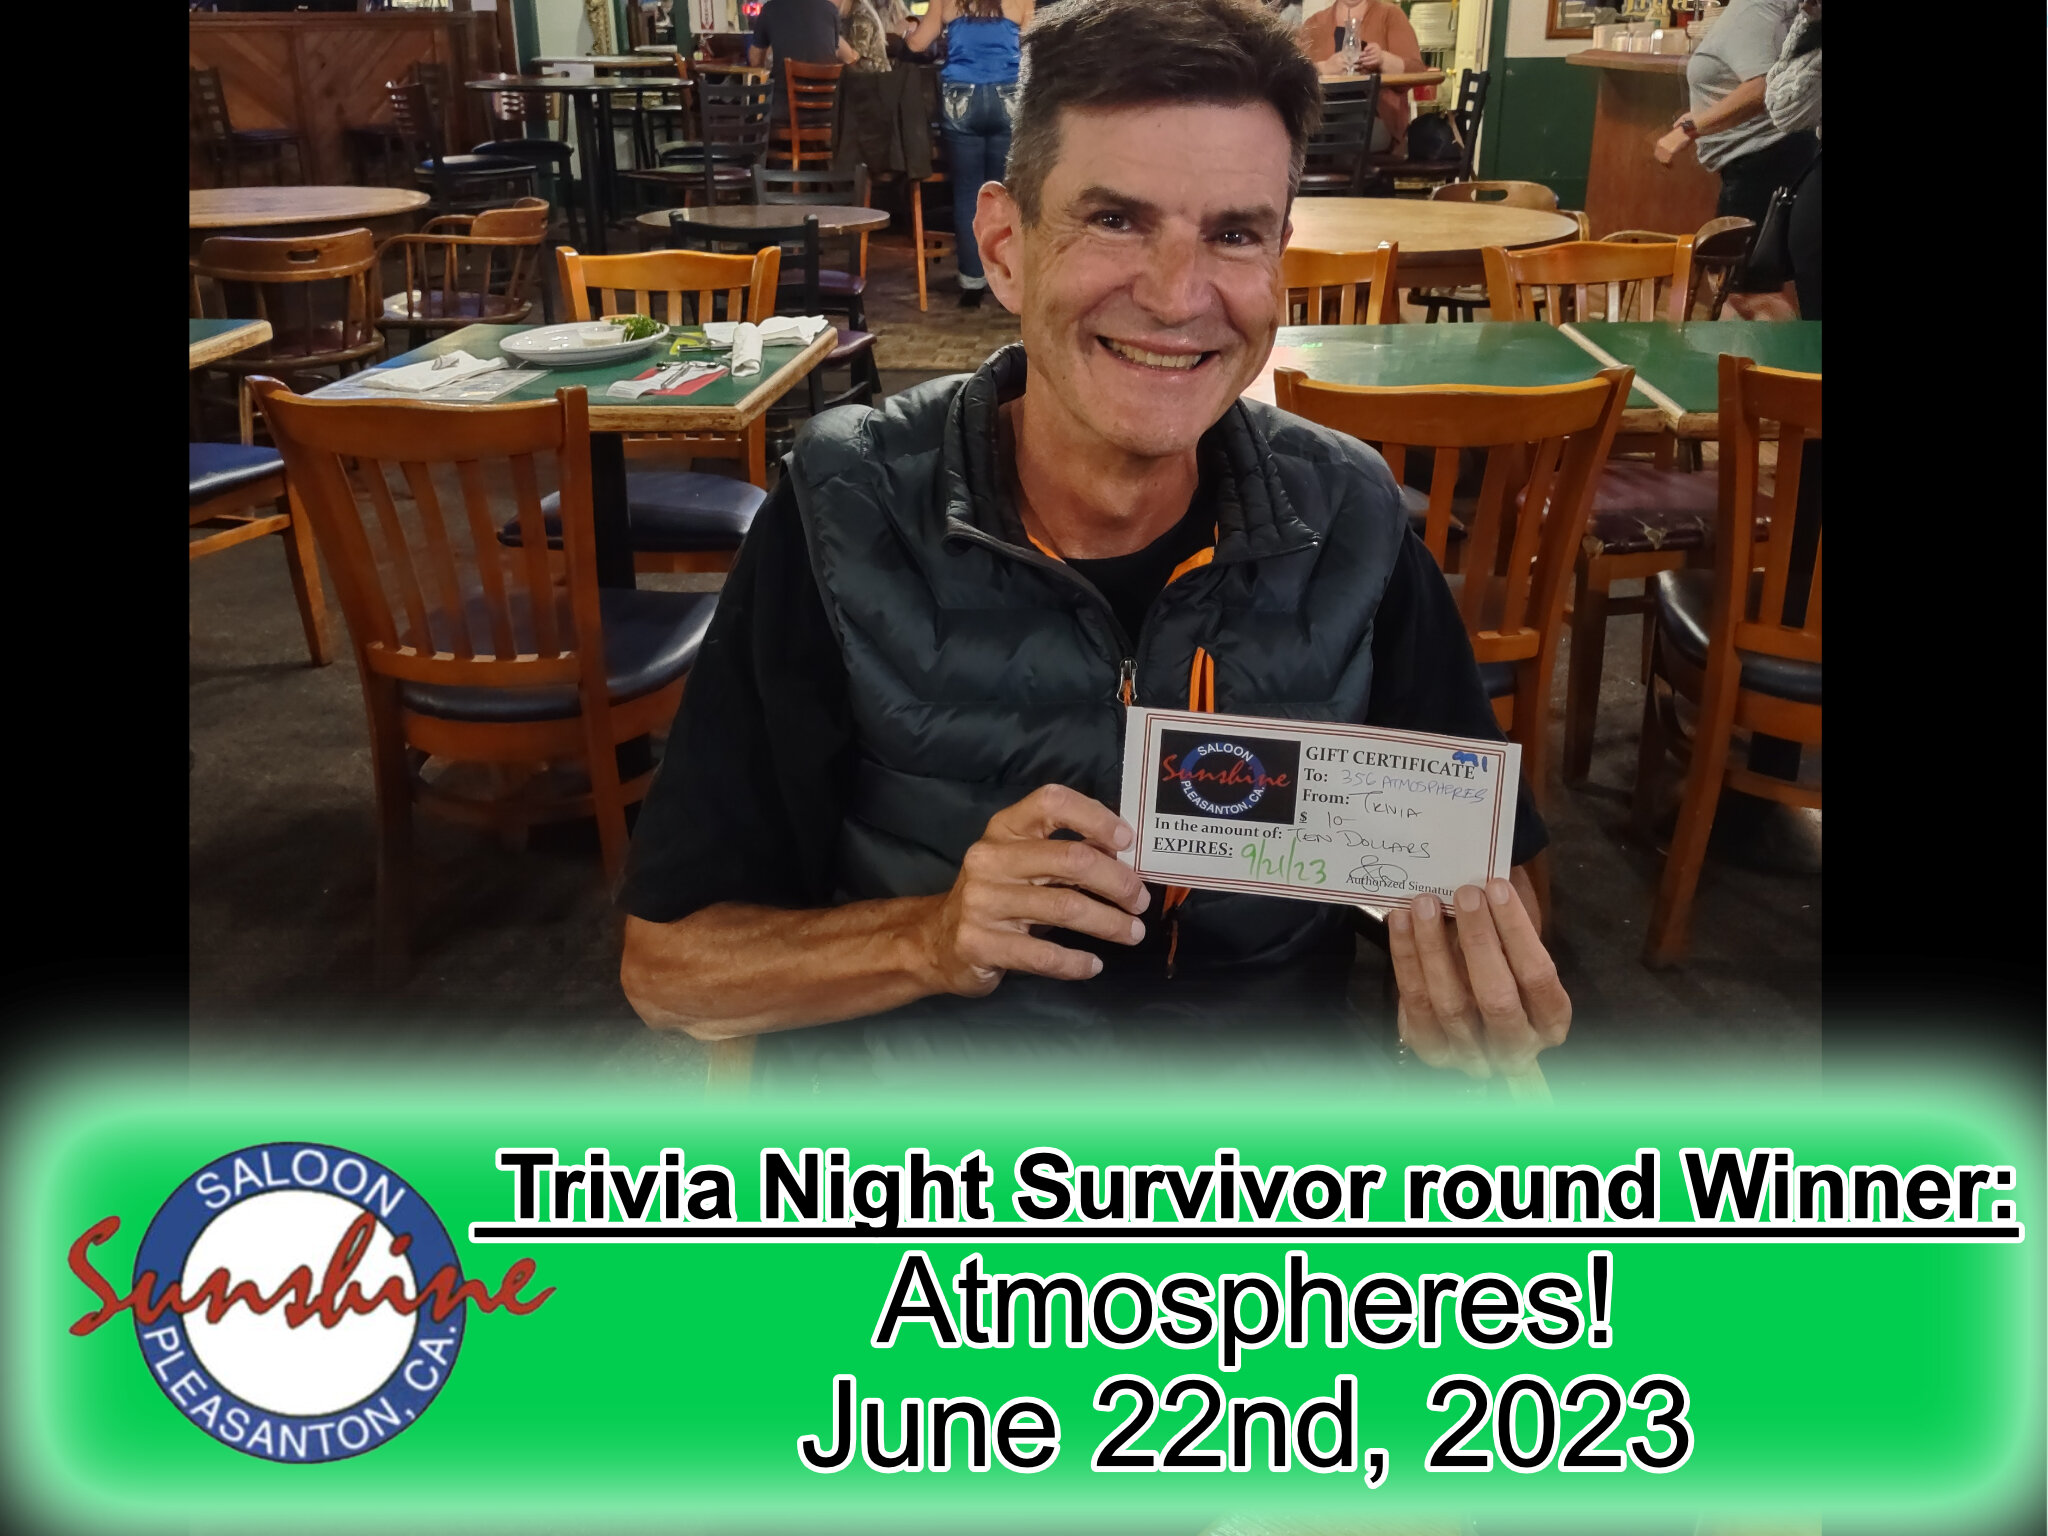 Congratulations to &quot;Yoder&quot; for getting top score at last weeks Thursday night Trivia!
Join us Thursday night for multiple rounds of trivia, multiple chances to win a gift certificate, and multiple chances for a spot on the hall of fame at #